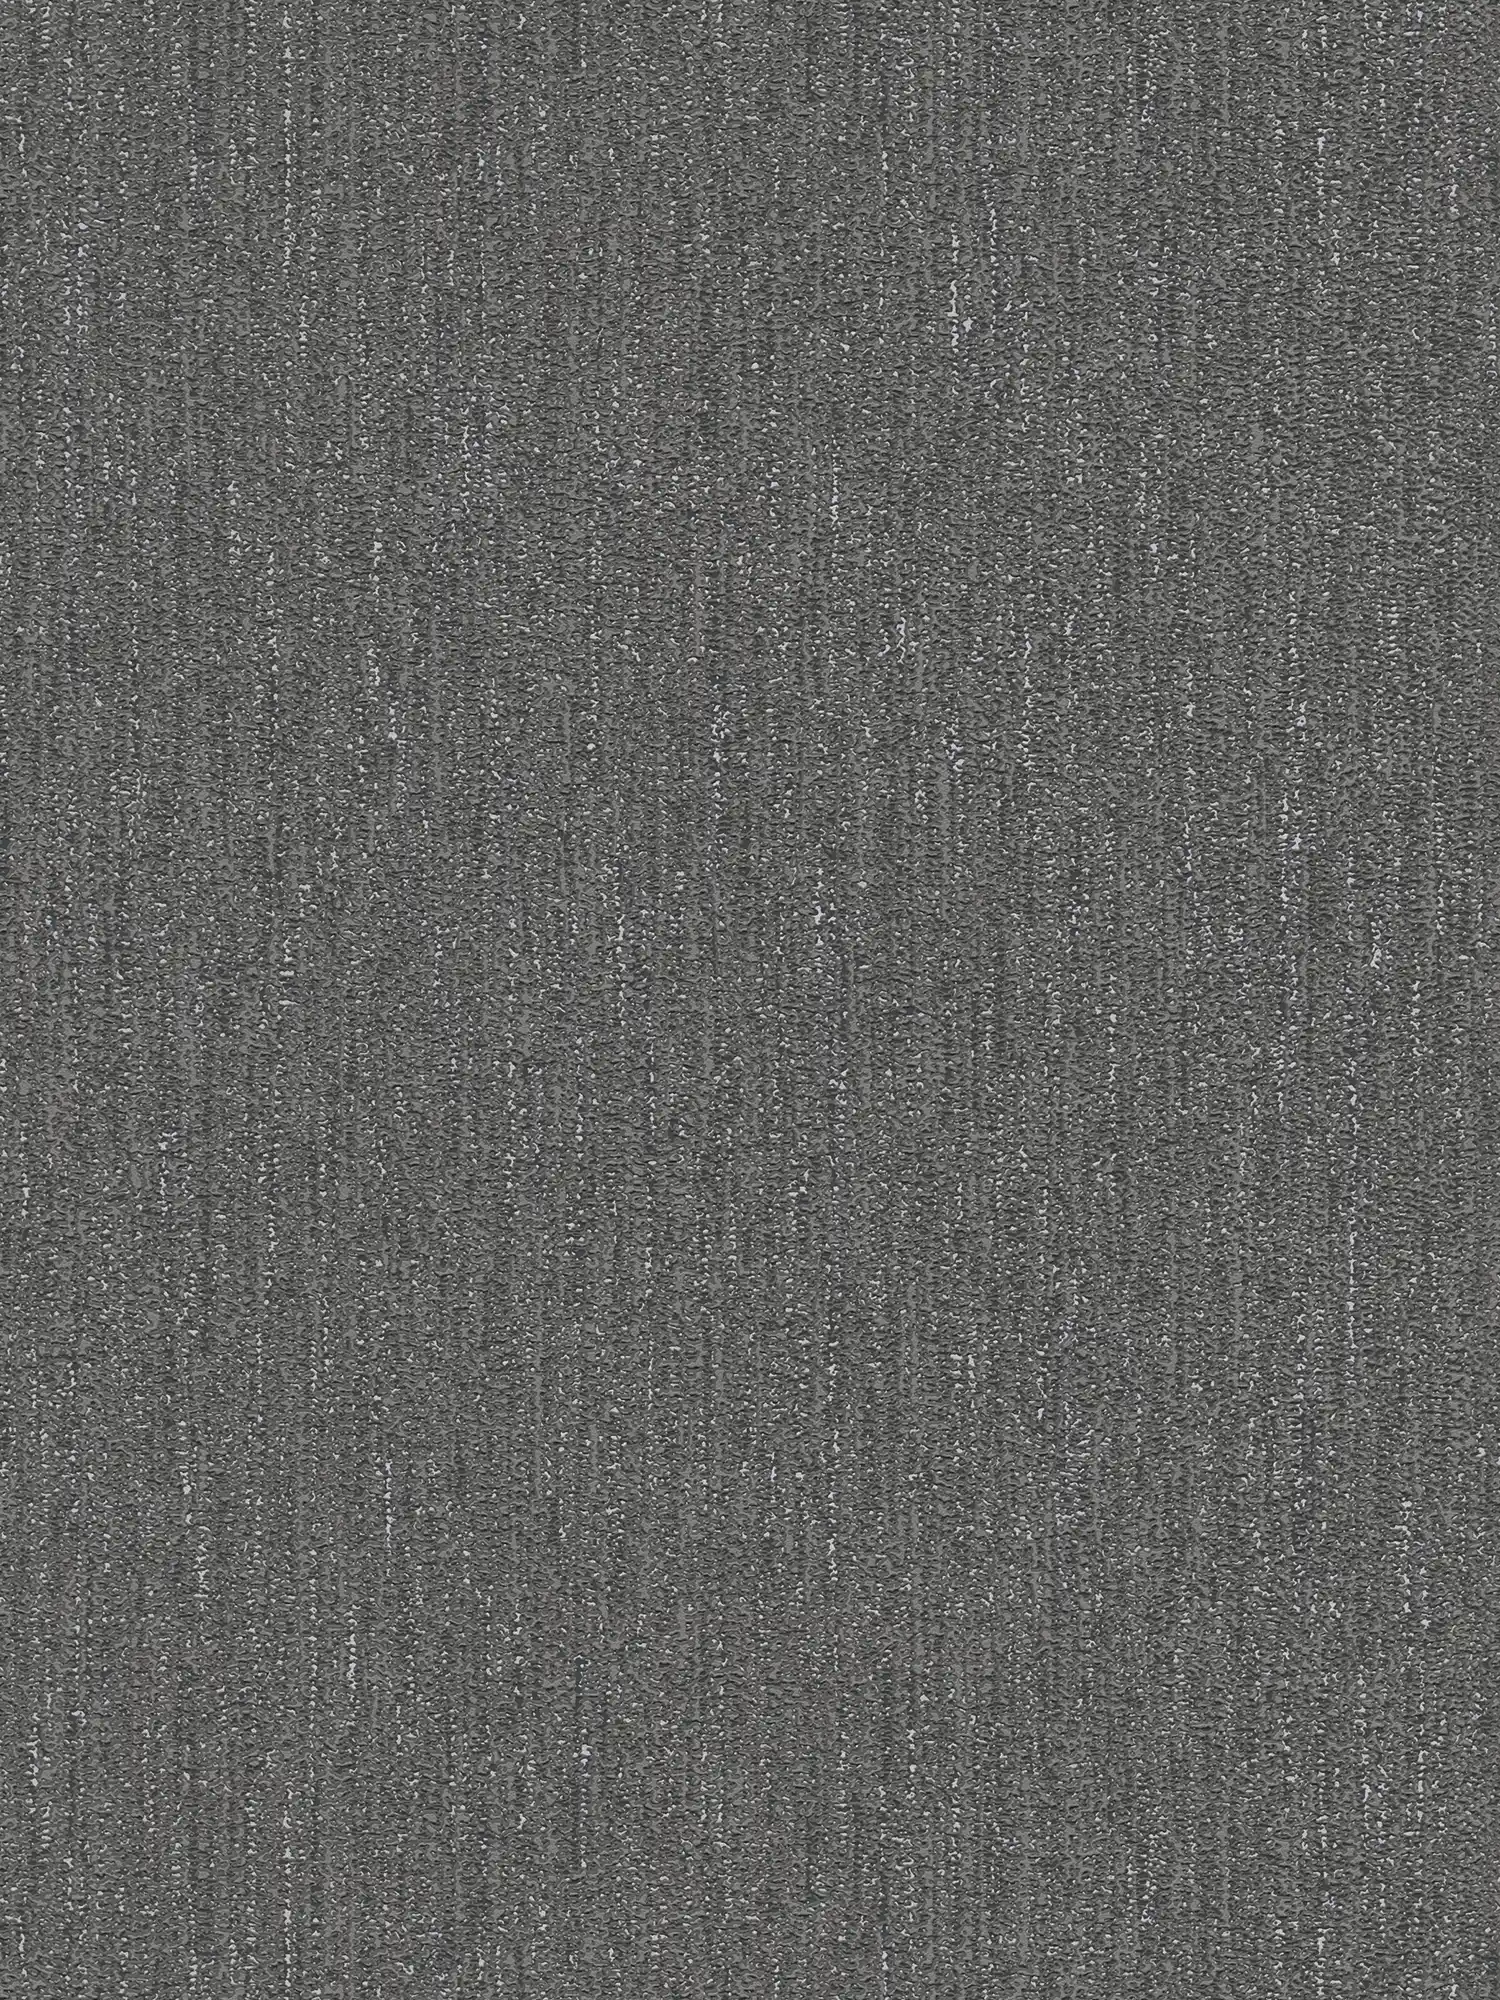 Light glossy wallpaper with fabric structure - black, grey, silver
